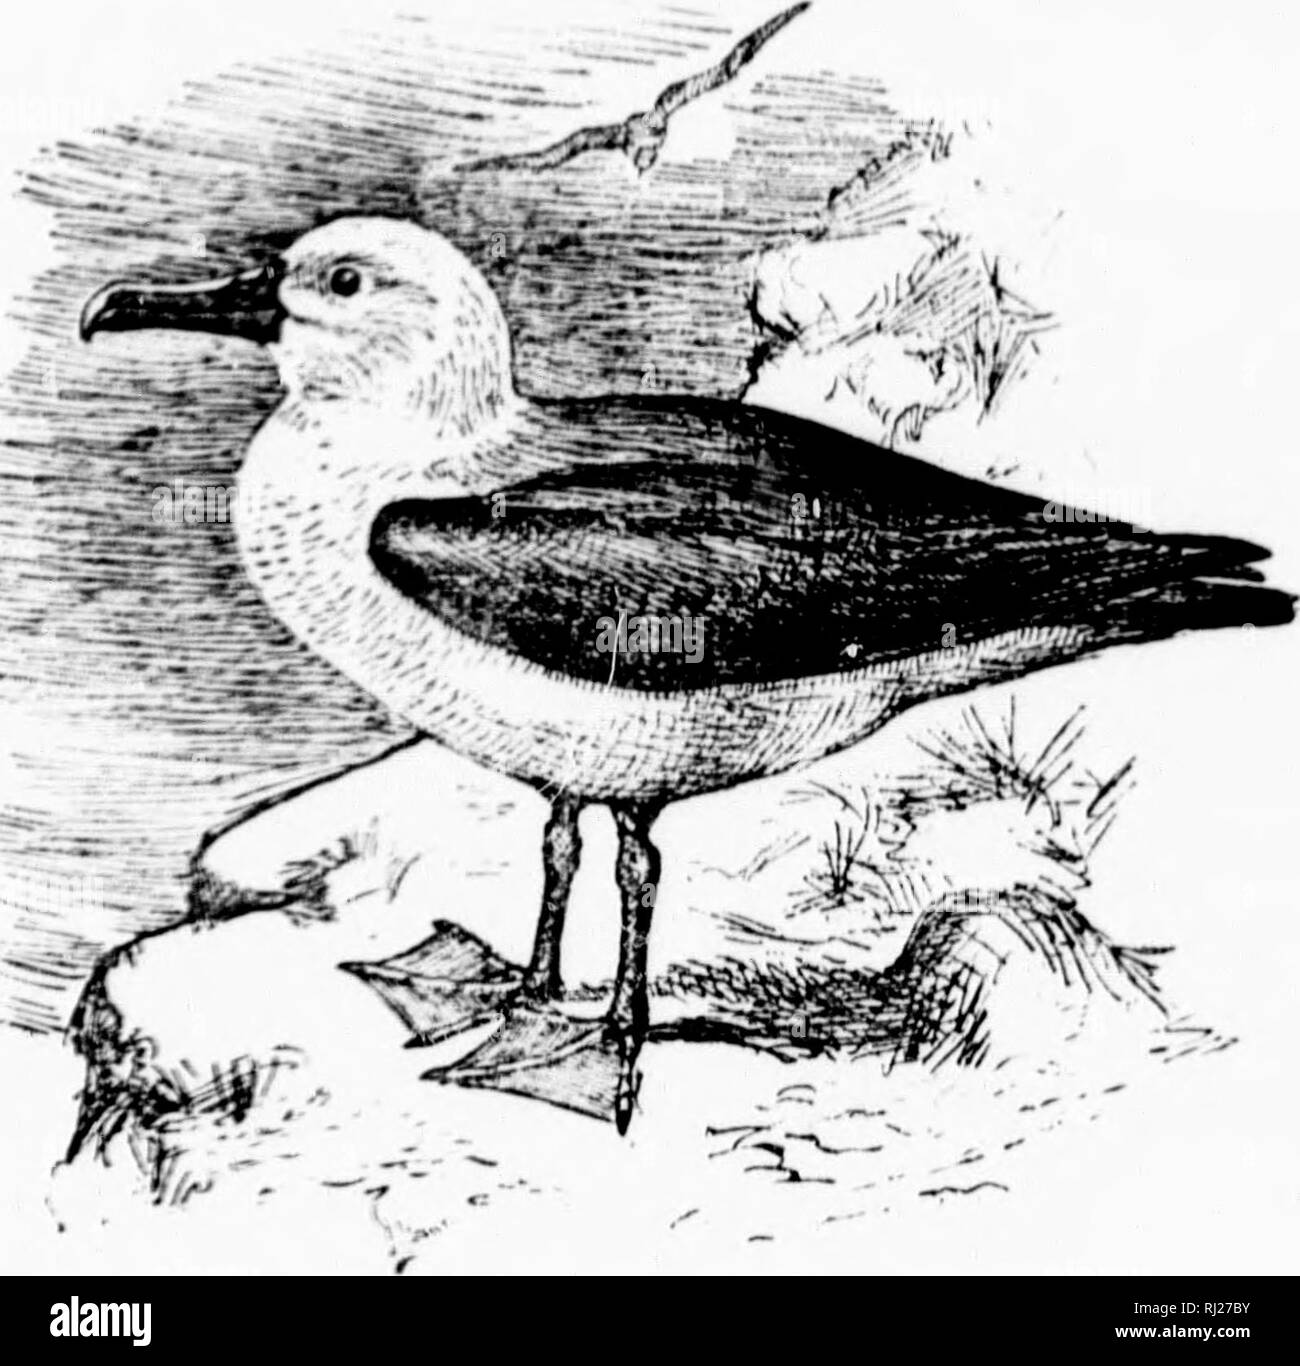 . A popular handbook of the ornithology of eastern North America [microform]. Birds; Ornithology; Game and game-birds; Water-birds; Oiseaux; Ornithologie; Gibier; Oiseaux aquatiques. YELLOW-NOSED ALBATROSS. Thal.ssogeron culminatus. Char. Mantle dark bluish slate, shading to brownish on wings and head; rump white; tail grayish; under parts white. Length about 36 inches. iVt'sf. Tn an exposed situation on an ocean island ; a bulky structure of coarse herbage and mud lined with fine grass and feathers. As new material is added each succeeding year, the height is increased. Es^^'. I; dull white, Stock Photo